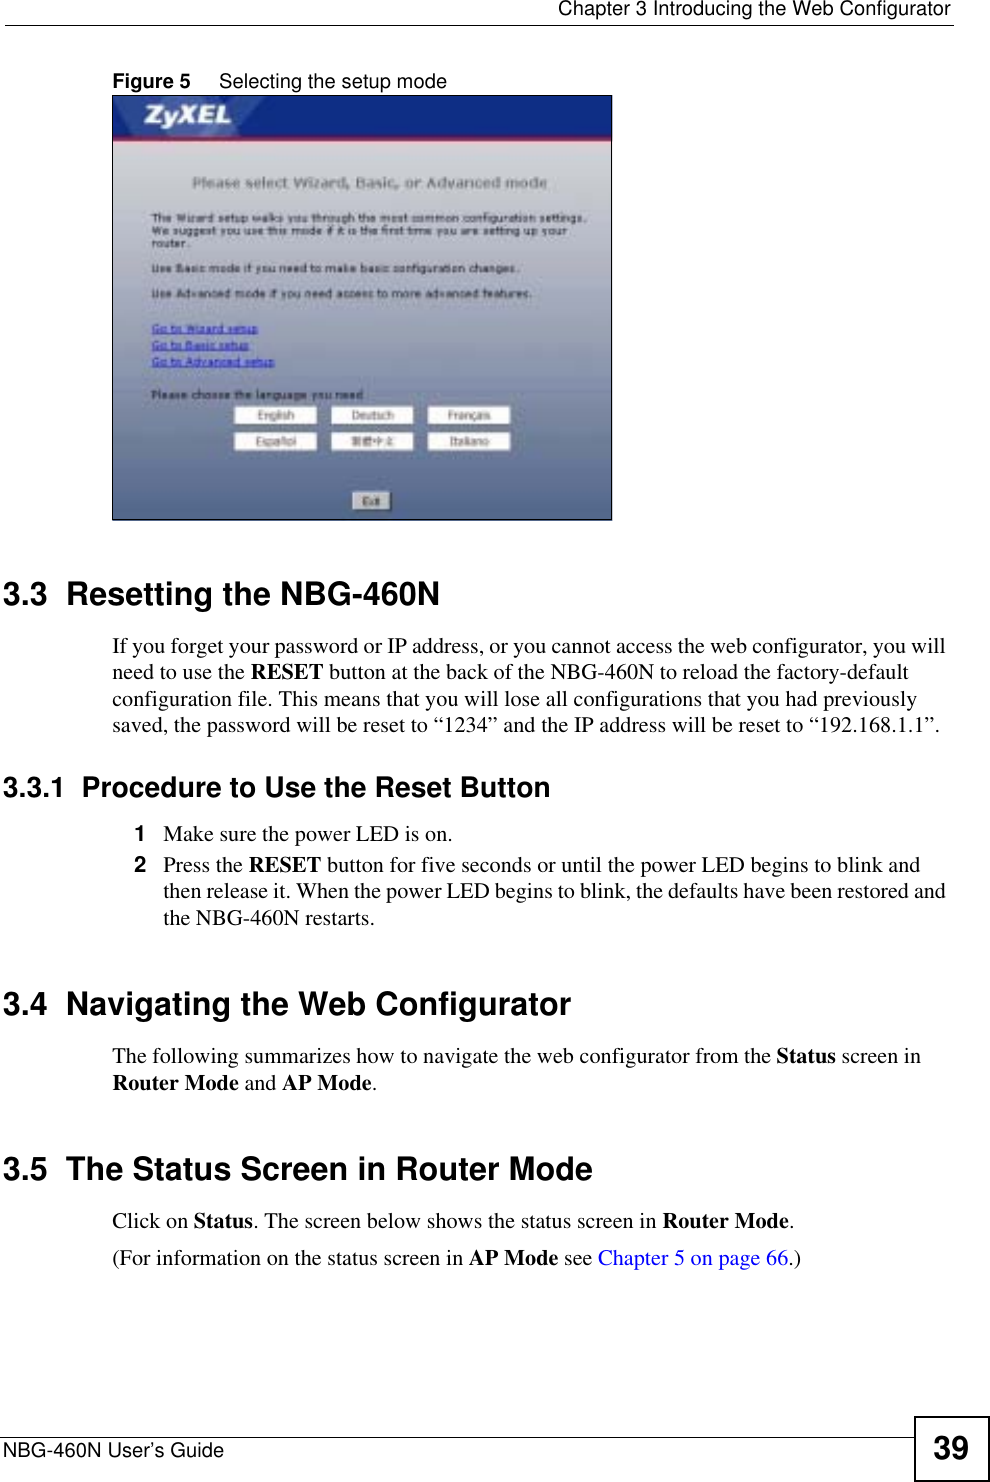  Chapter 3 Introducing the Web ConfiguratorNBG-460N User’s Guide 39Figure 5     Selecting the setup mode3.3  Resetting the NBG-460NIf you forget your password or IP address, or you cannot access the web configurator, you will need to use the RESET button at the back of the NBG-460N to reload the factory-default configuration file. This means that you will lose all configurations that you had previously saved, the password will be reset to “1234” and the IP address will be reset to “192.168.1.1”.3.3.1  Procedure to Use the Reset Button1Make sure the power LED is on.2Press the RESET button for five seconds or until the power LED begins to blink and then release it. When the power LED begins to blink, the defaults have been restored and the NBG-460N restarts.3.4  Navigating the Web ConfiguratorThe following summarizes how to navigate the web configurator from the Status screen in Router Mode and AP Mode.3.5  The Status Screen in Router ModeClick on Status. The screen below shows the status screen in Router Mode.(For information on the status screen in AP Mode see Chapter 5 on page 66.)